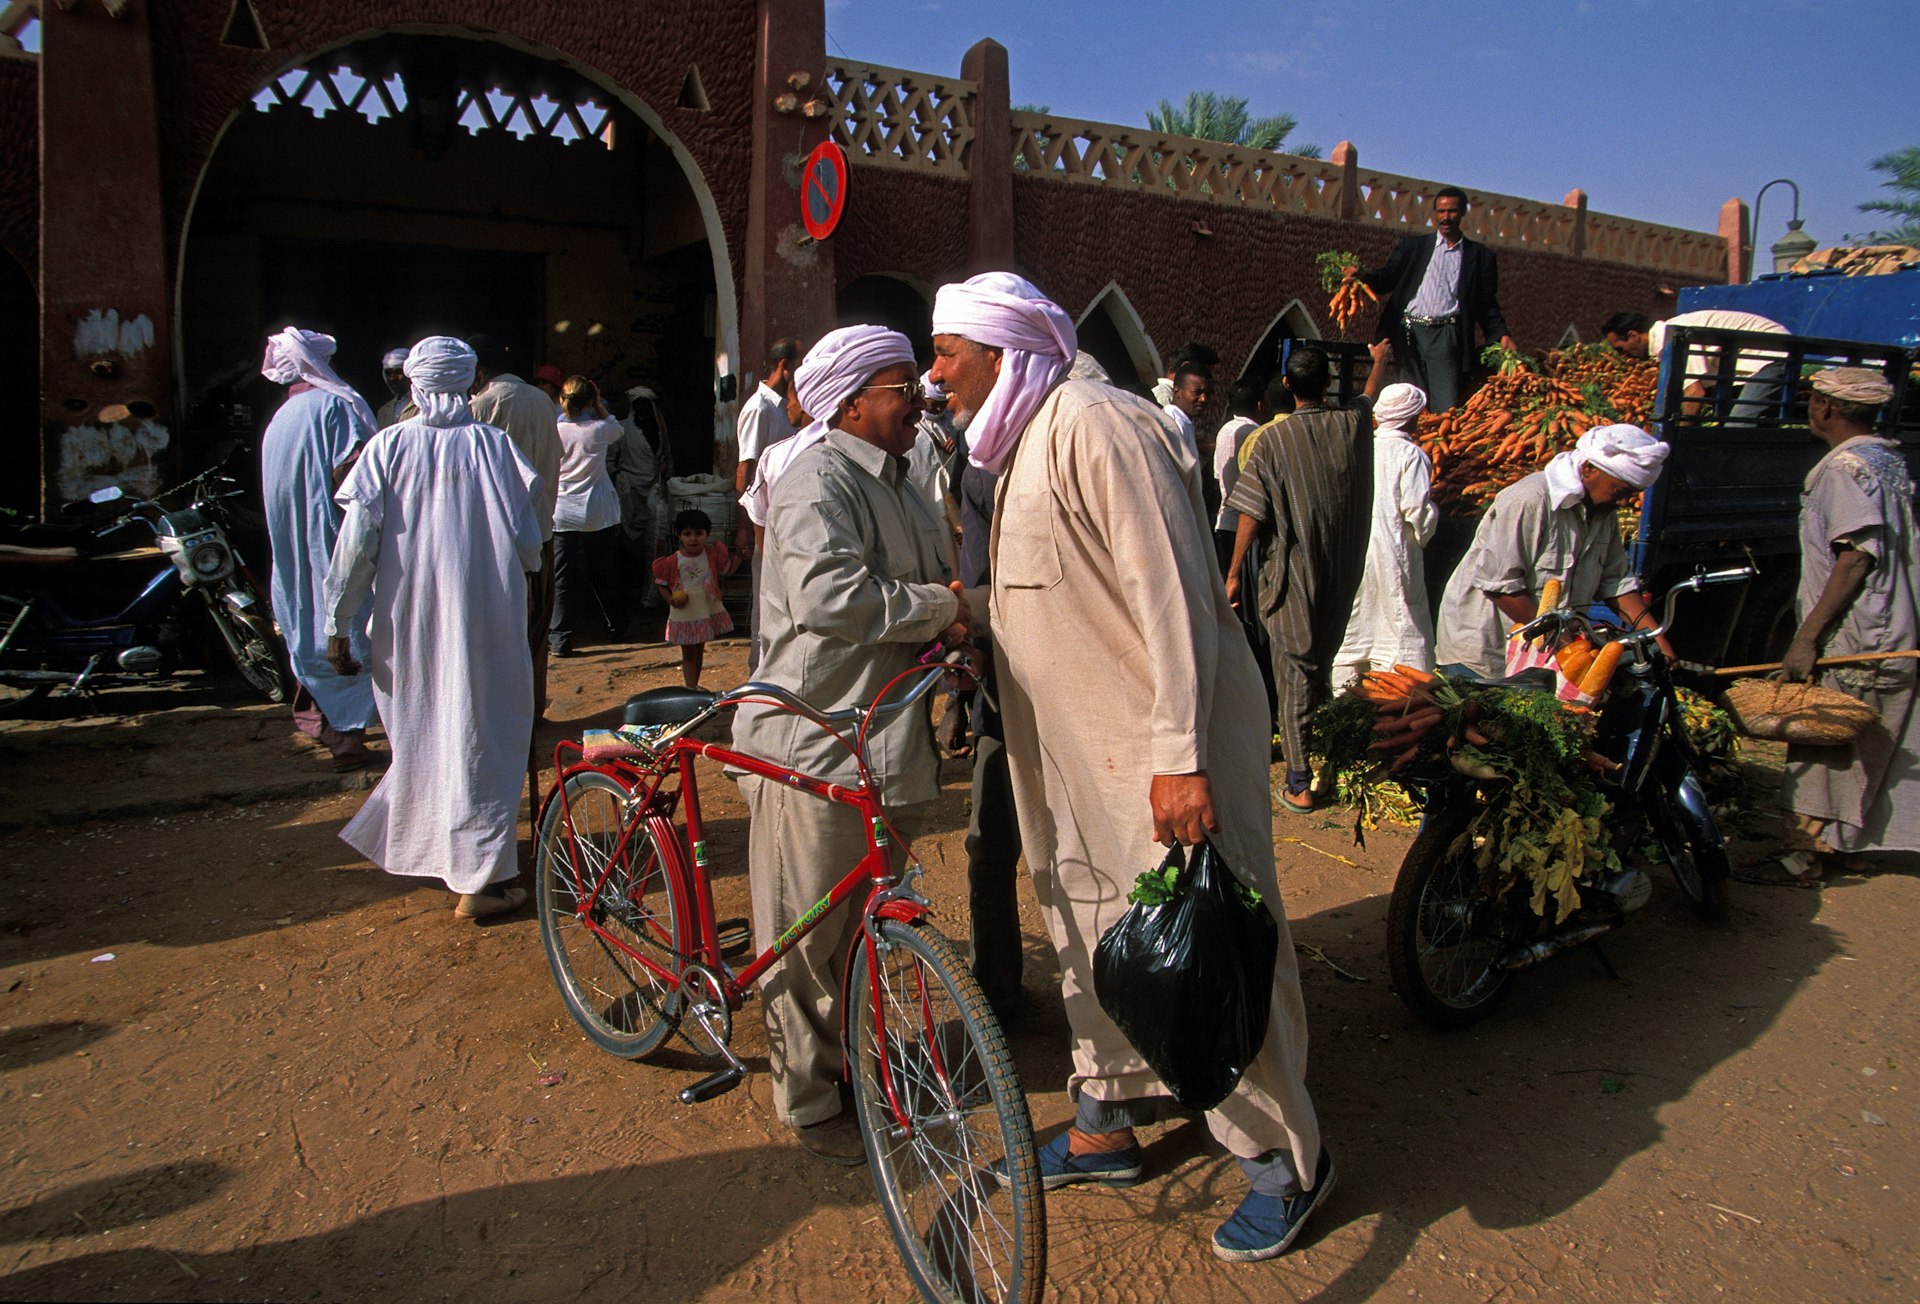 Tuareg people of Timimoun in Algeria at the shops in a market.